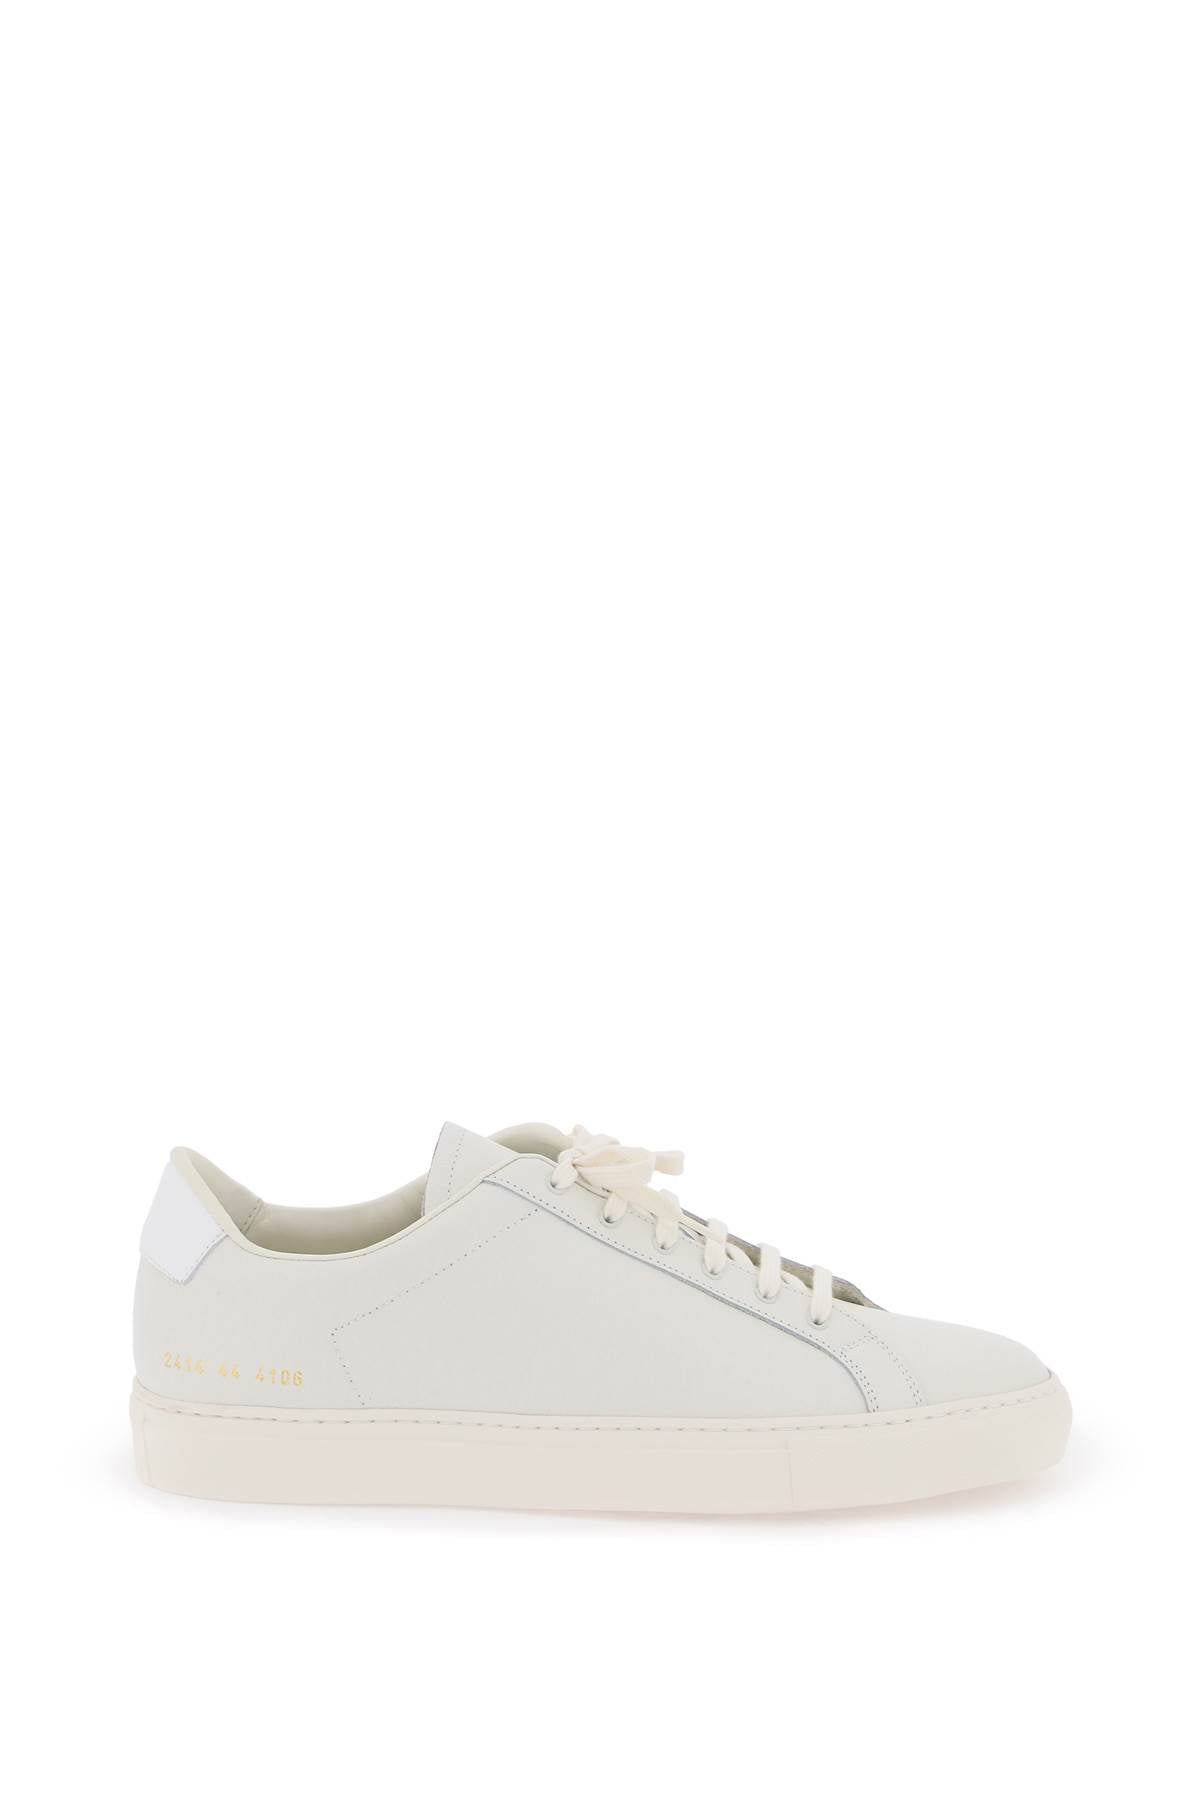 Common projects retro low top sne-0